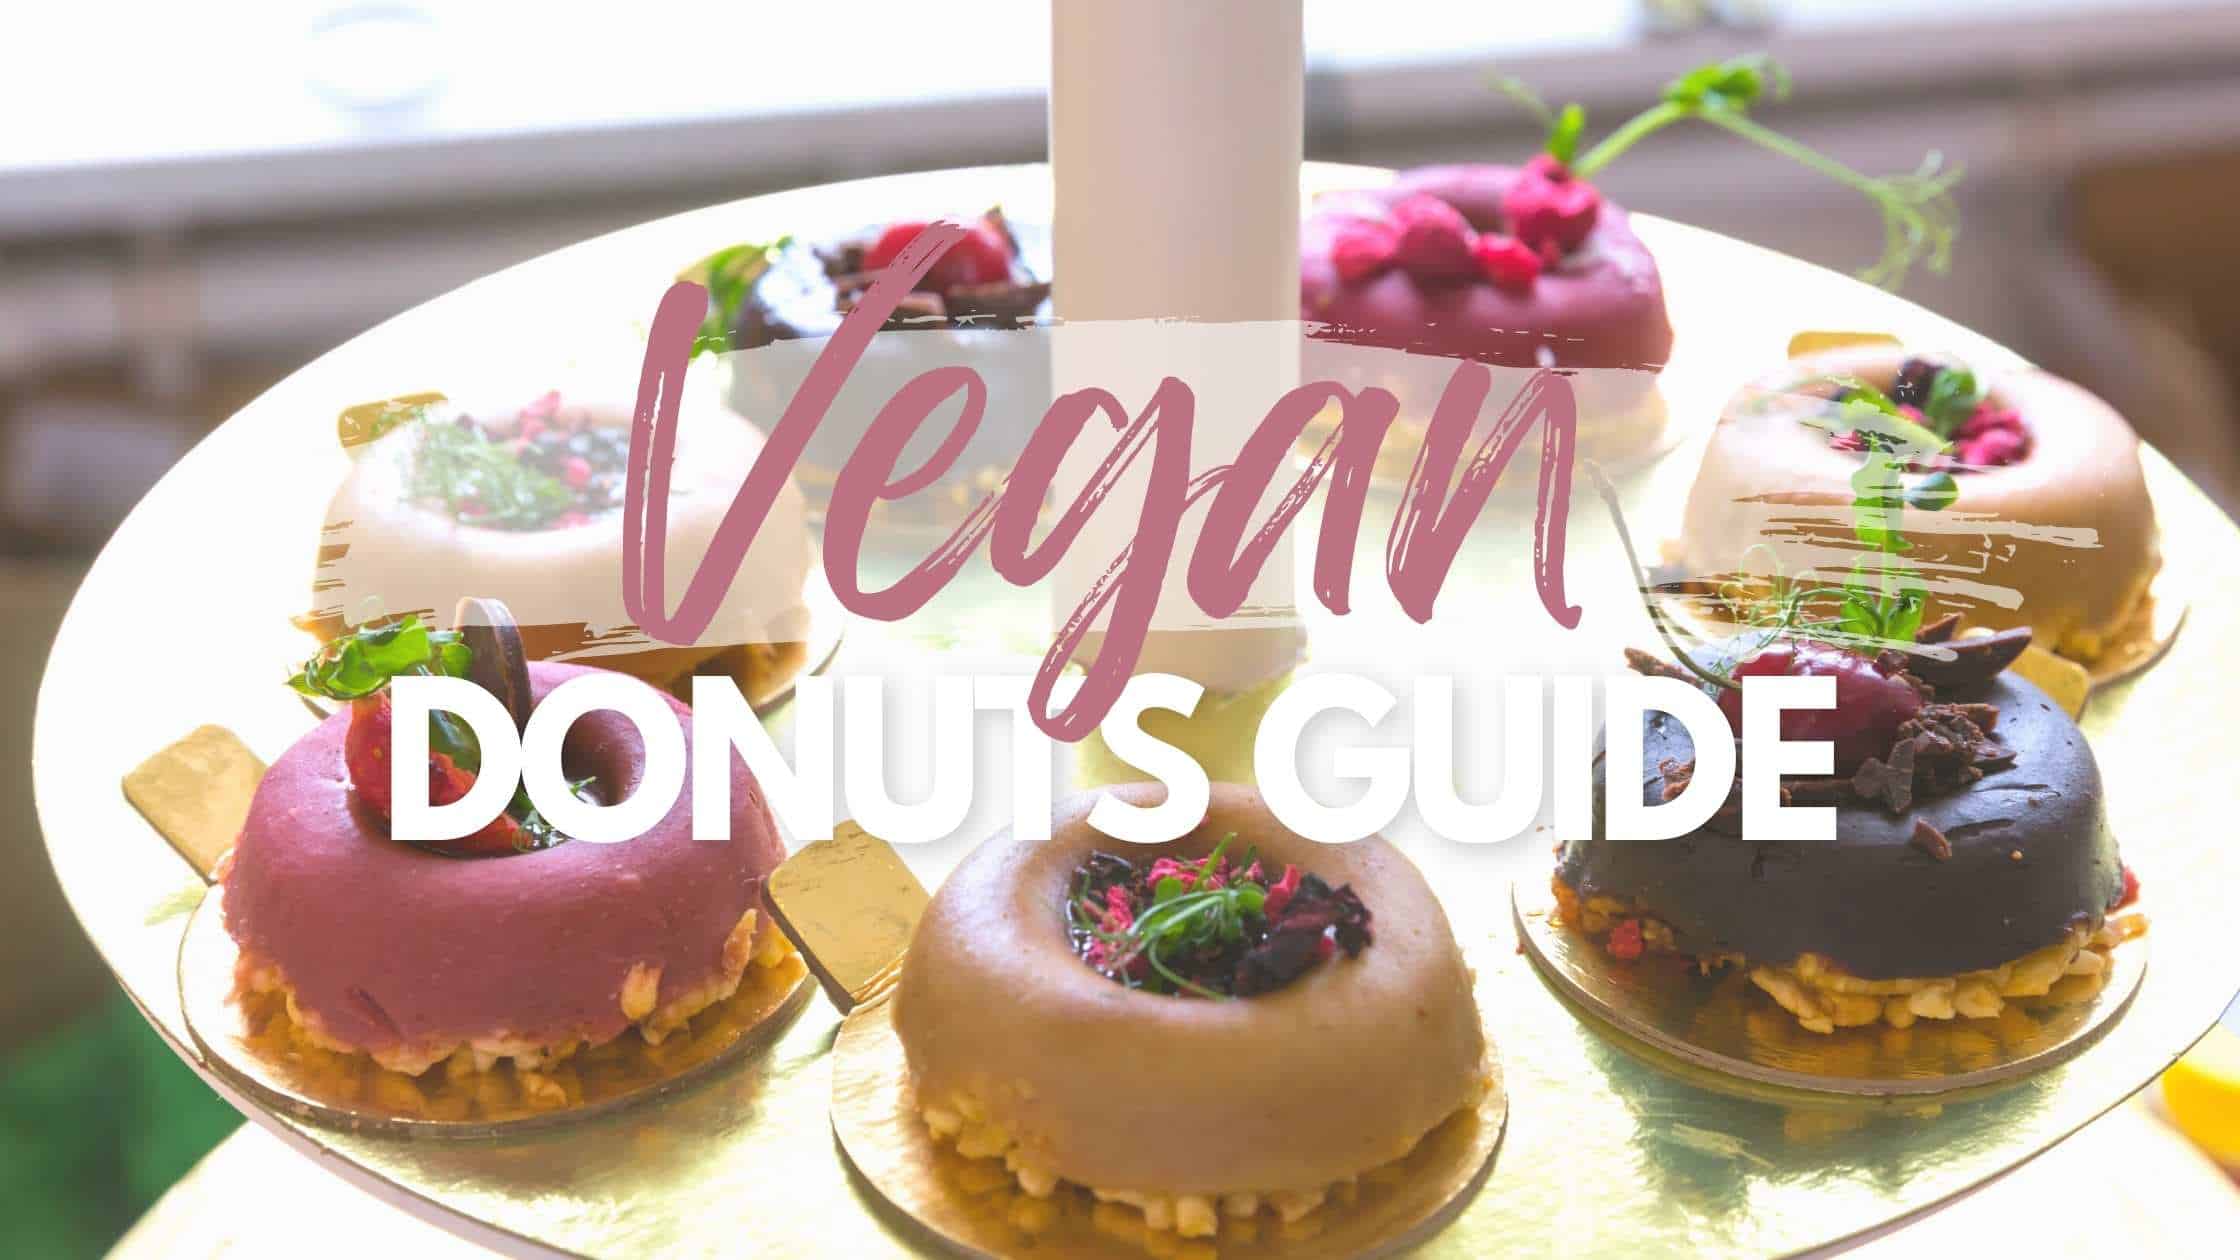 Vegan donuts guide with a tray of vegan donuts.